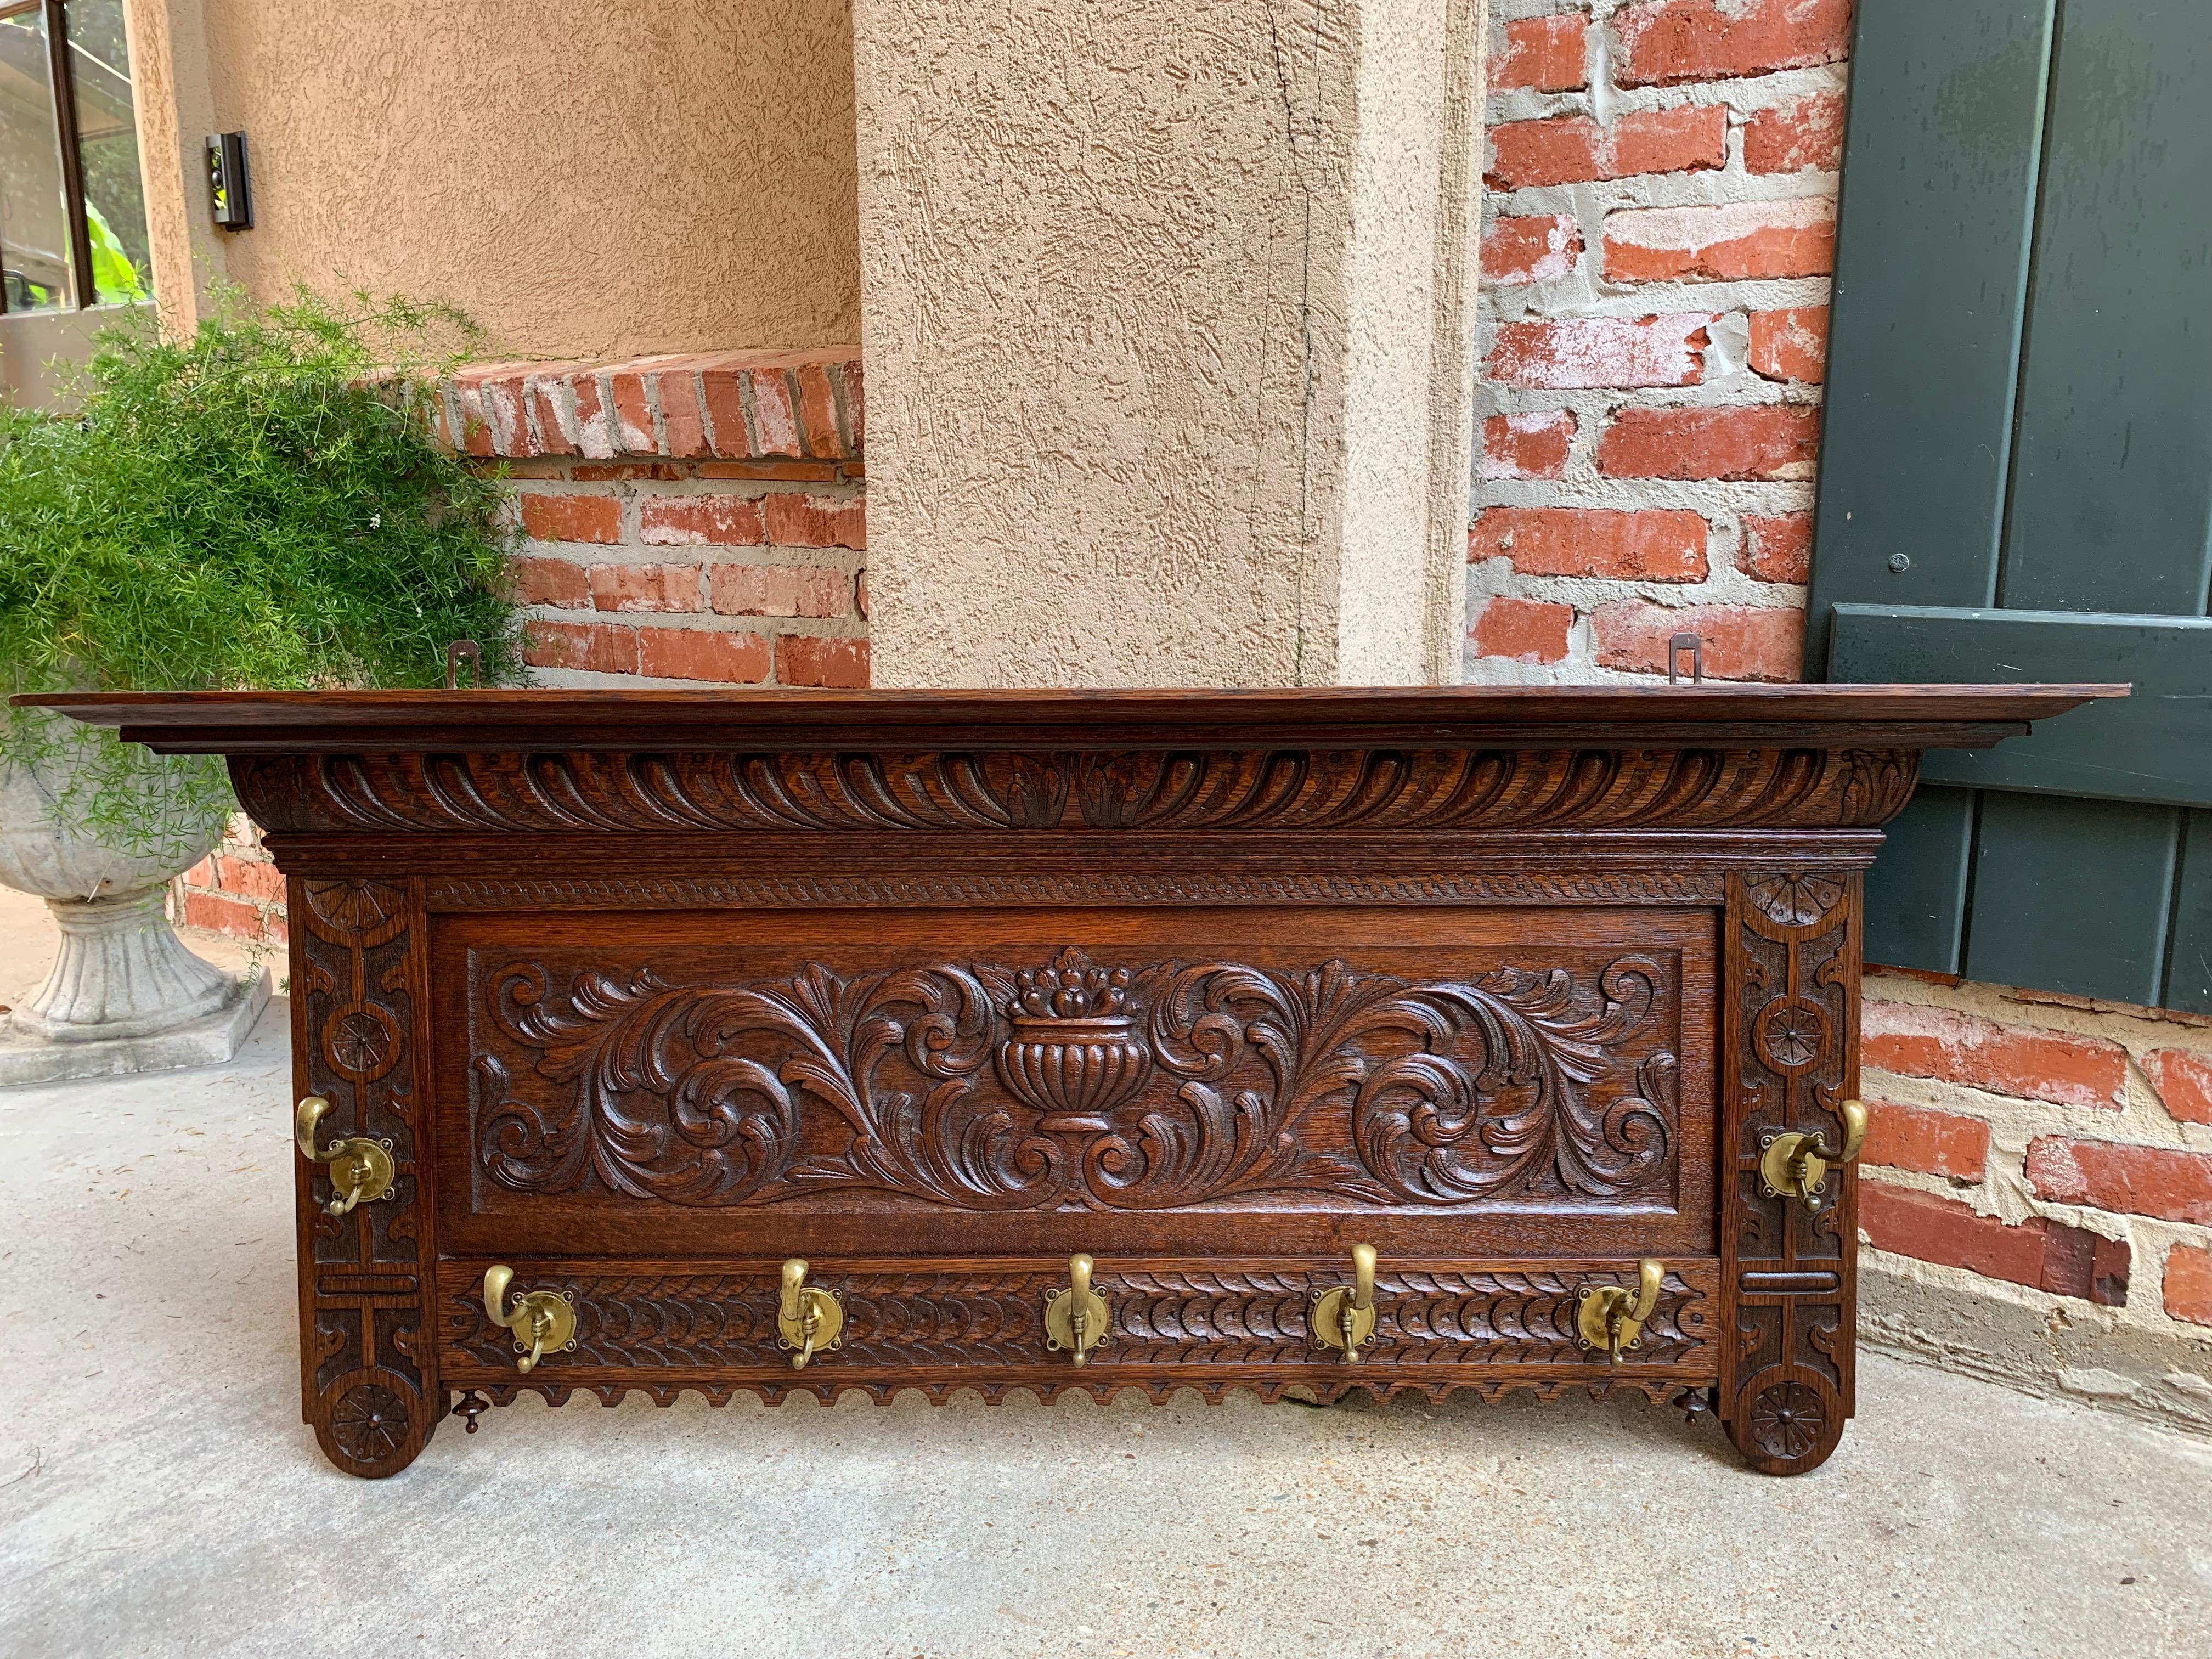 Direct from France, a large (over 4 ft. length) and gorgeous carved antique French wall shelf.
~ Outstanding carvings throughout, with carved French gadrooning on the upper crown above the oversized large center panel, with geometric carvings down